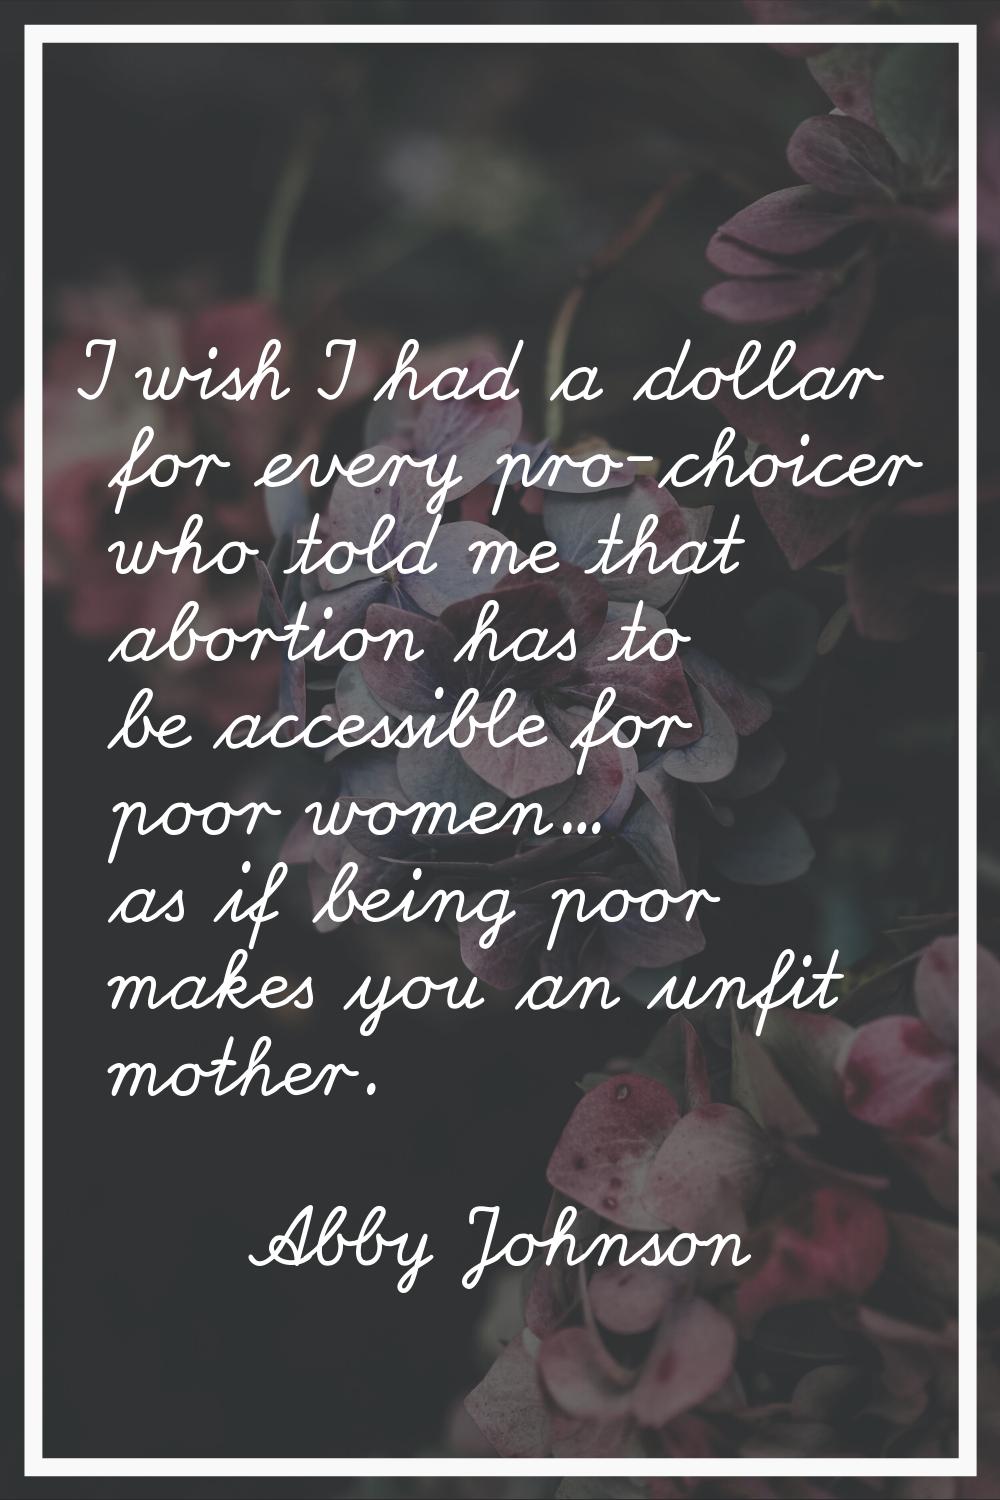 I wish I had a dollar for every pro-choicer who told me that abortion has to be accessible for poor